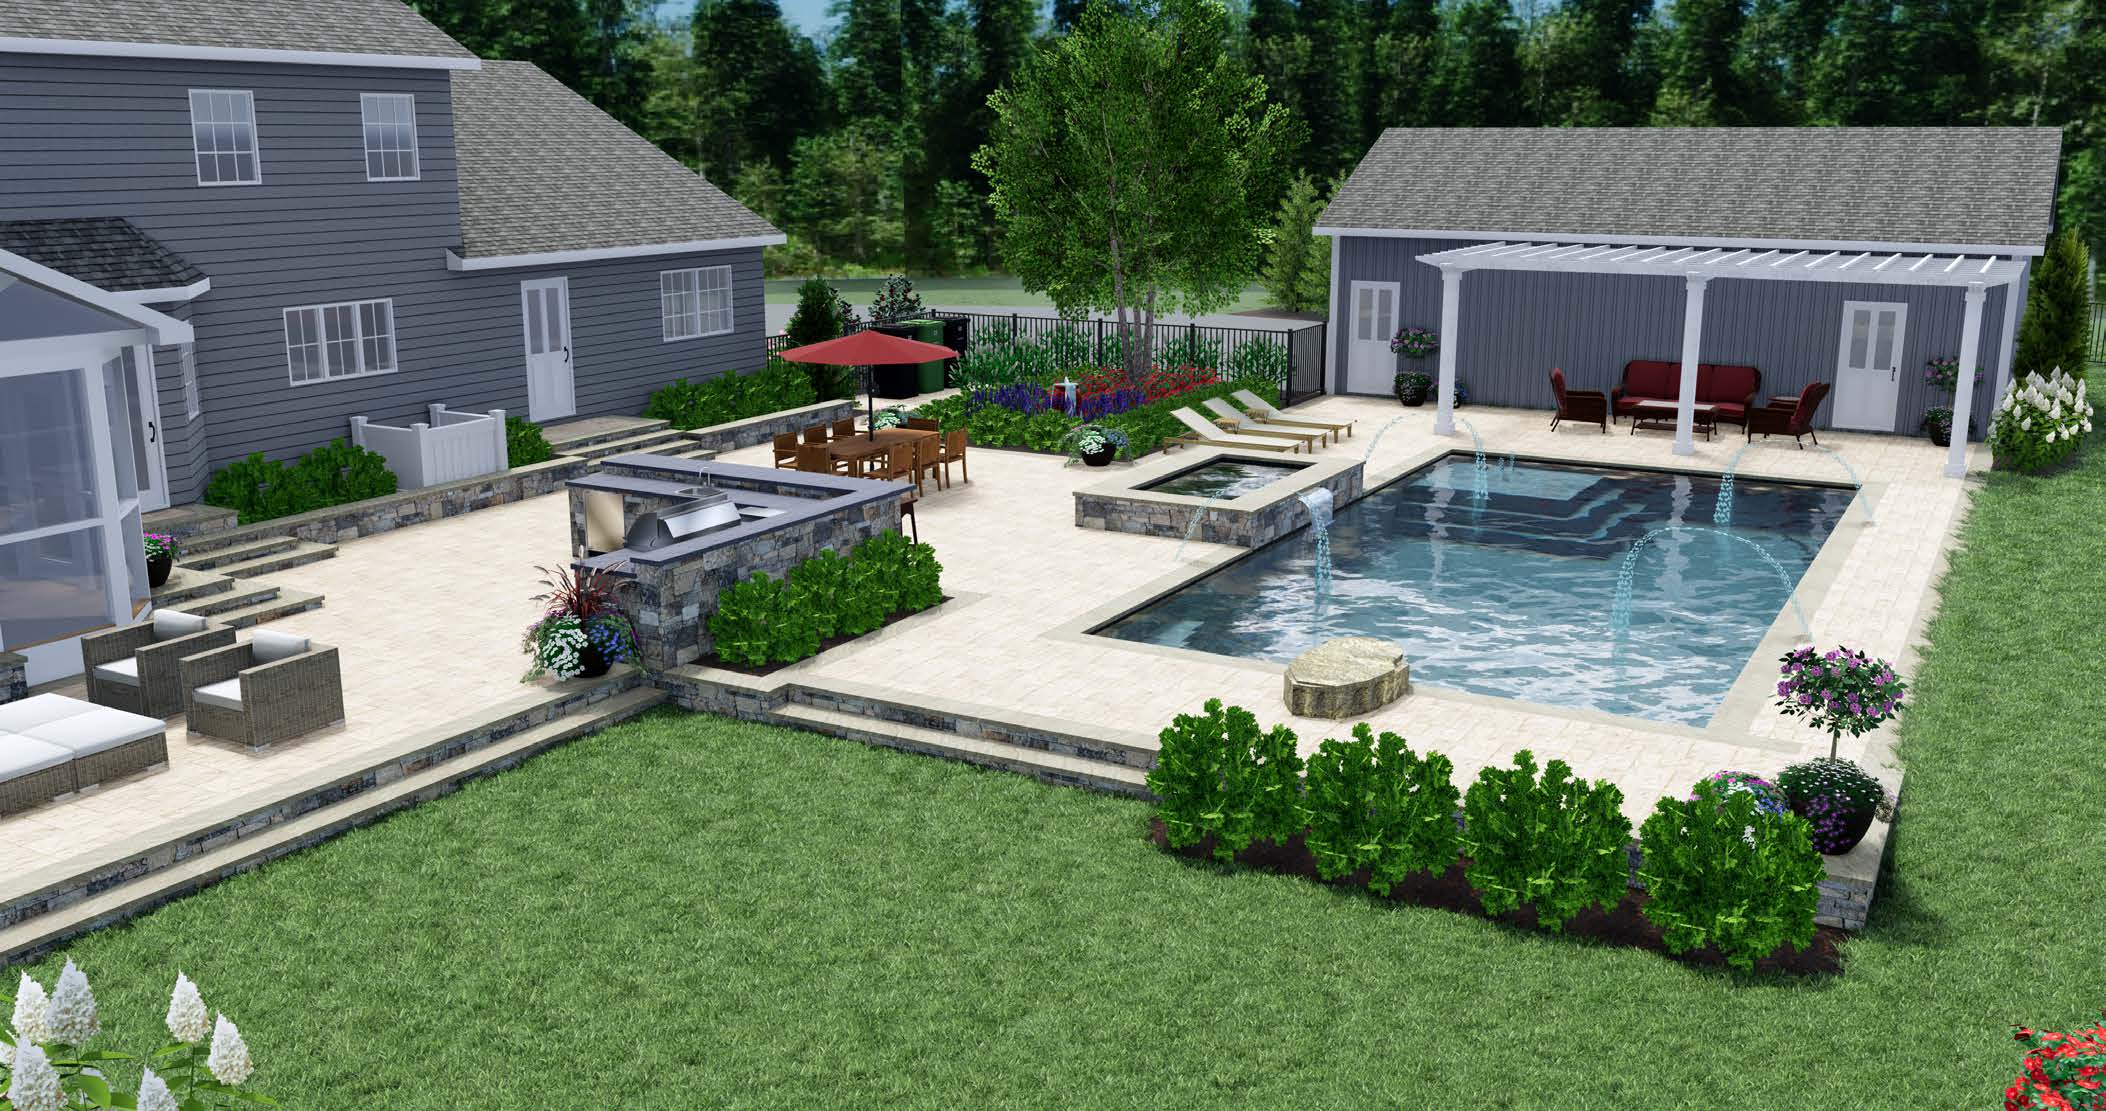 3D landscape design with patio, pool, and spa